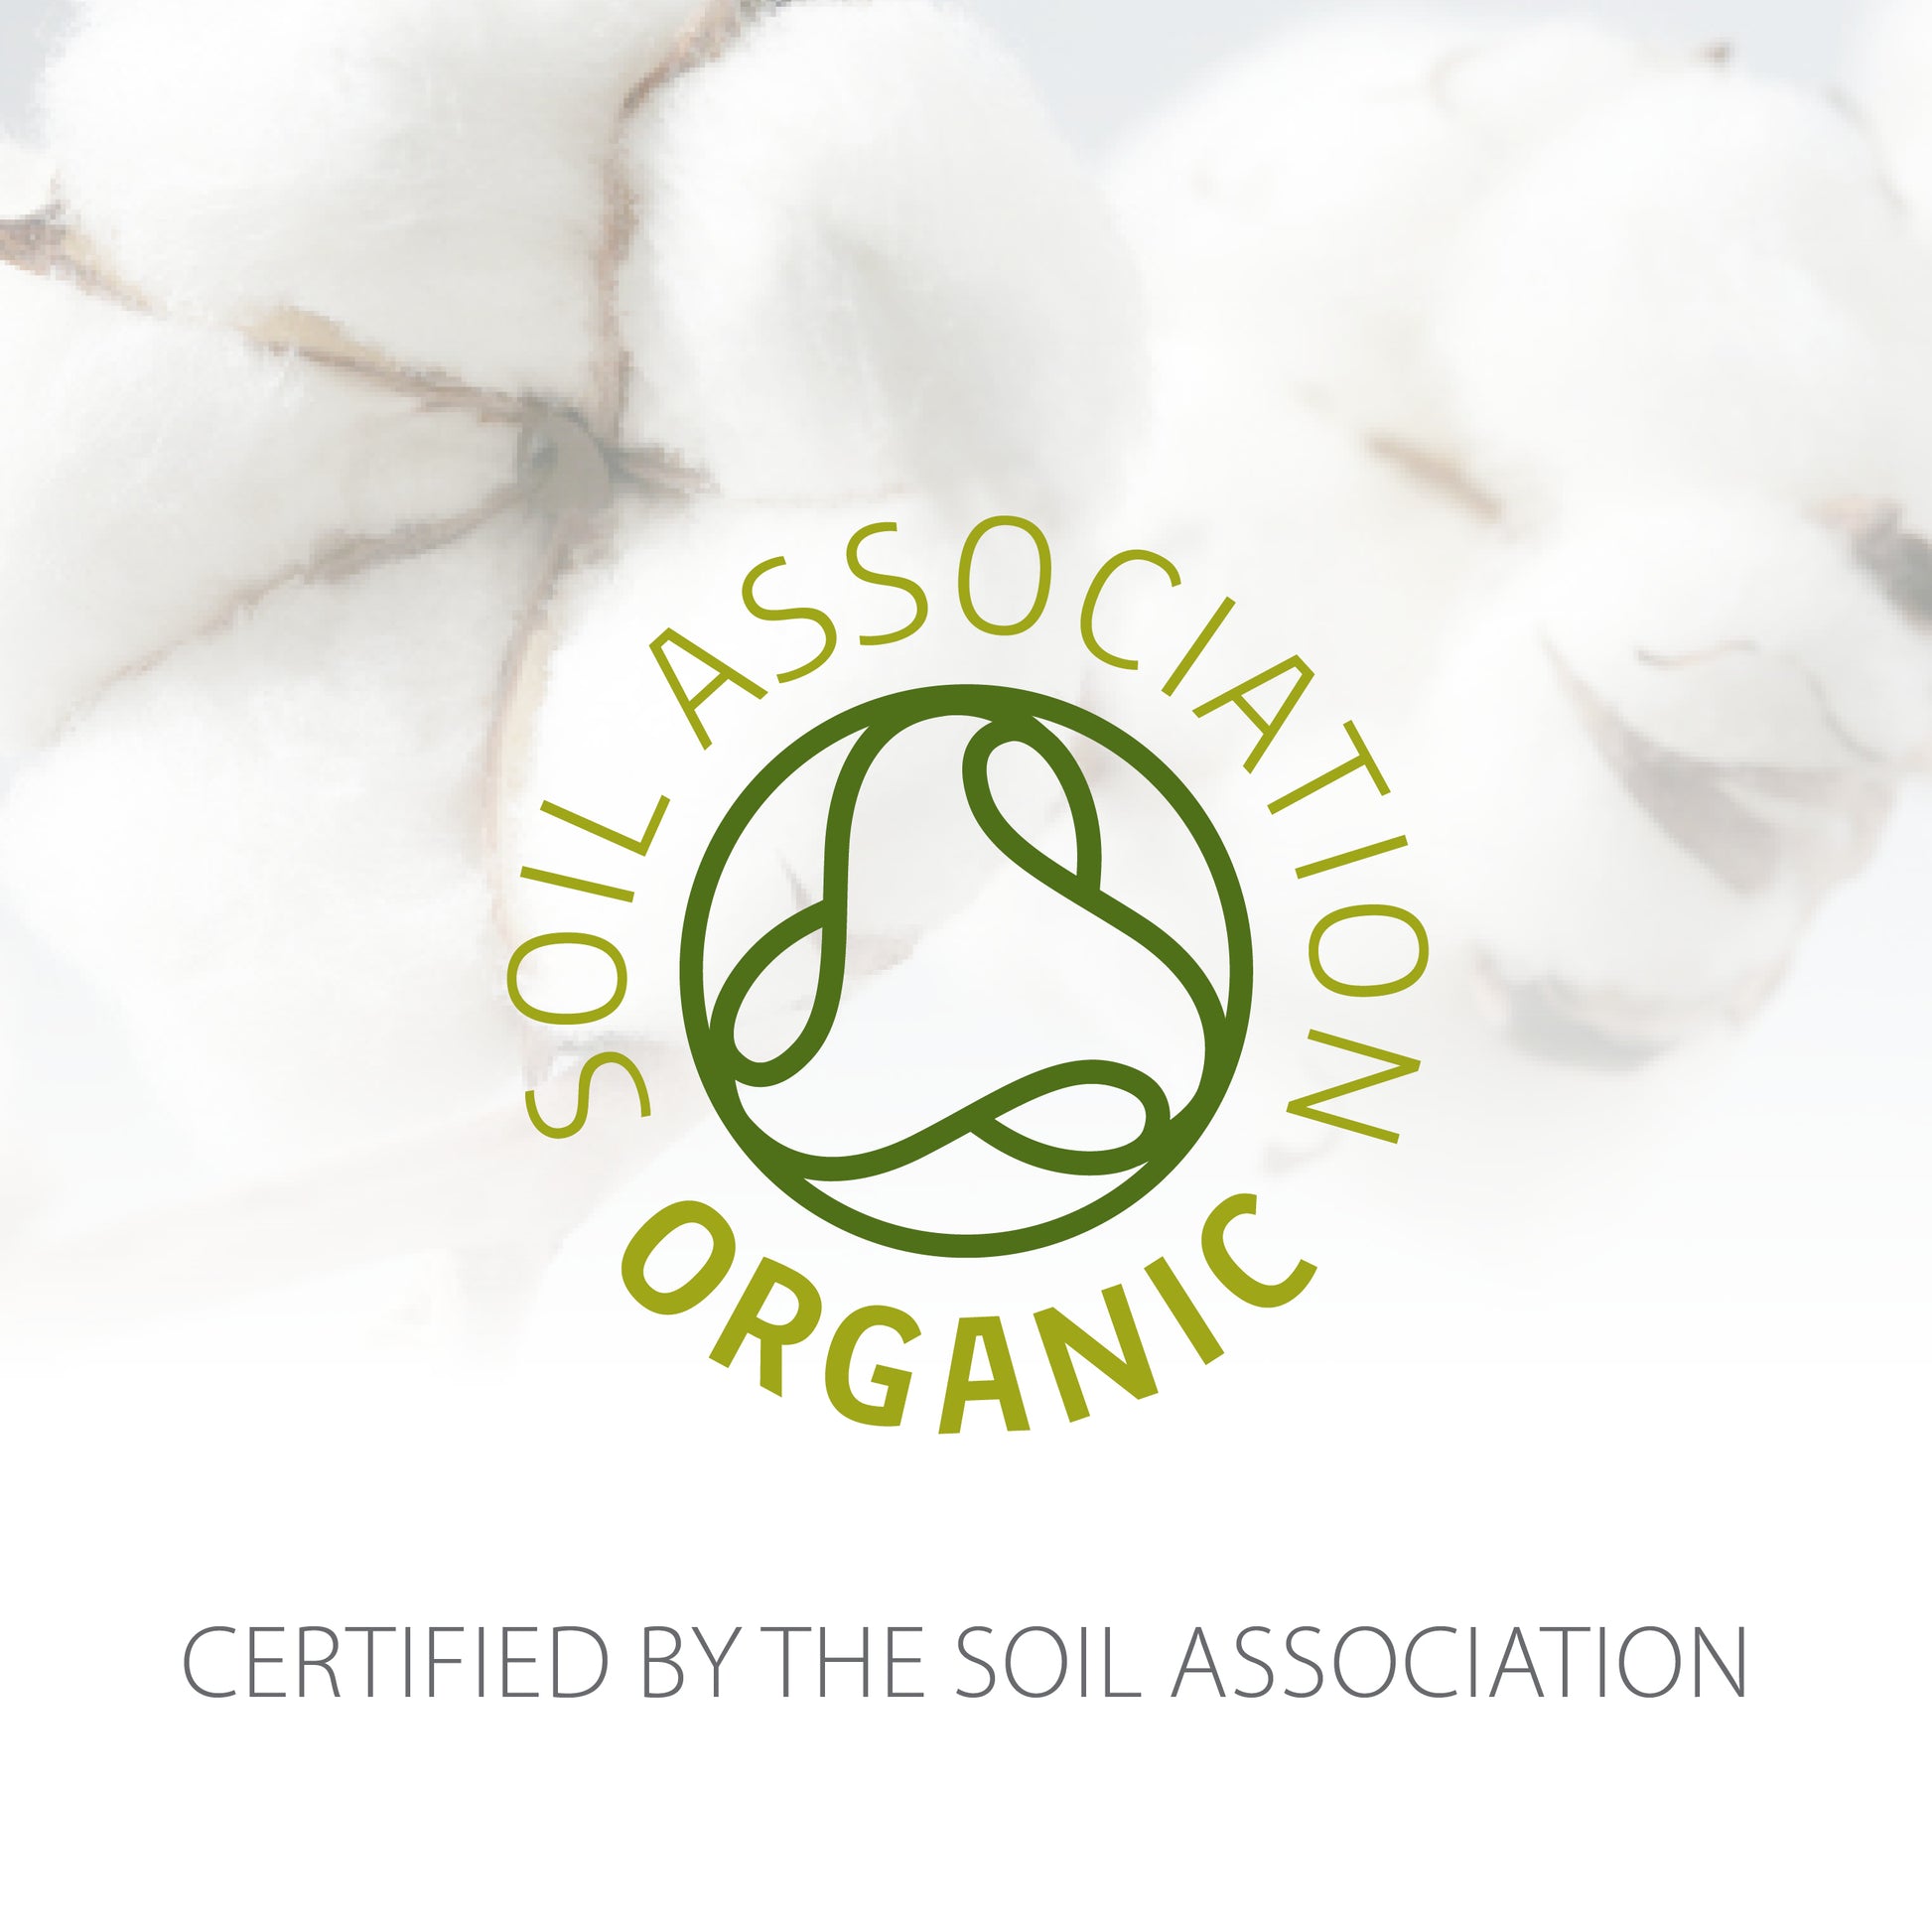 These standards set out the requirements for organic and natural health and beauty products certified to the internationally-recognised COSMOS standard and for Soil Association Health and Beauty Certified Products.